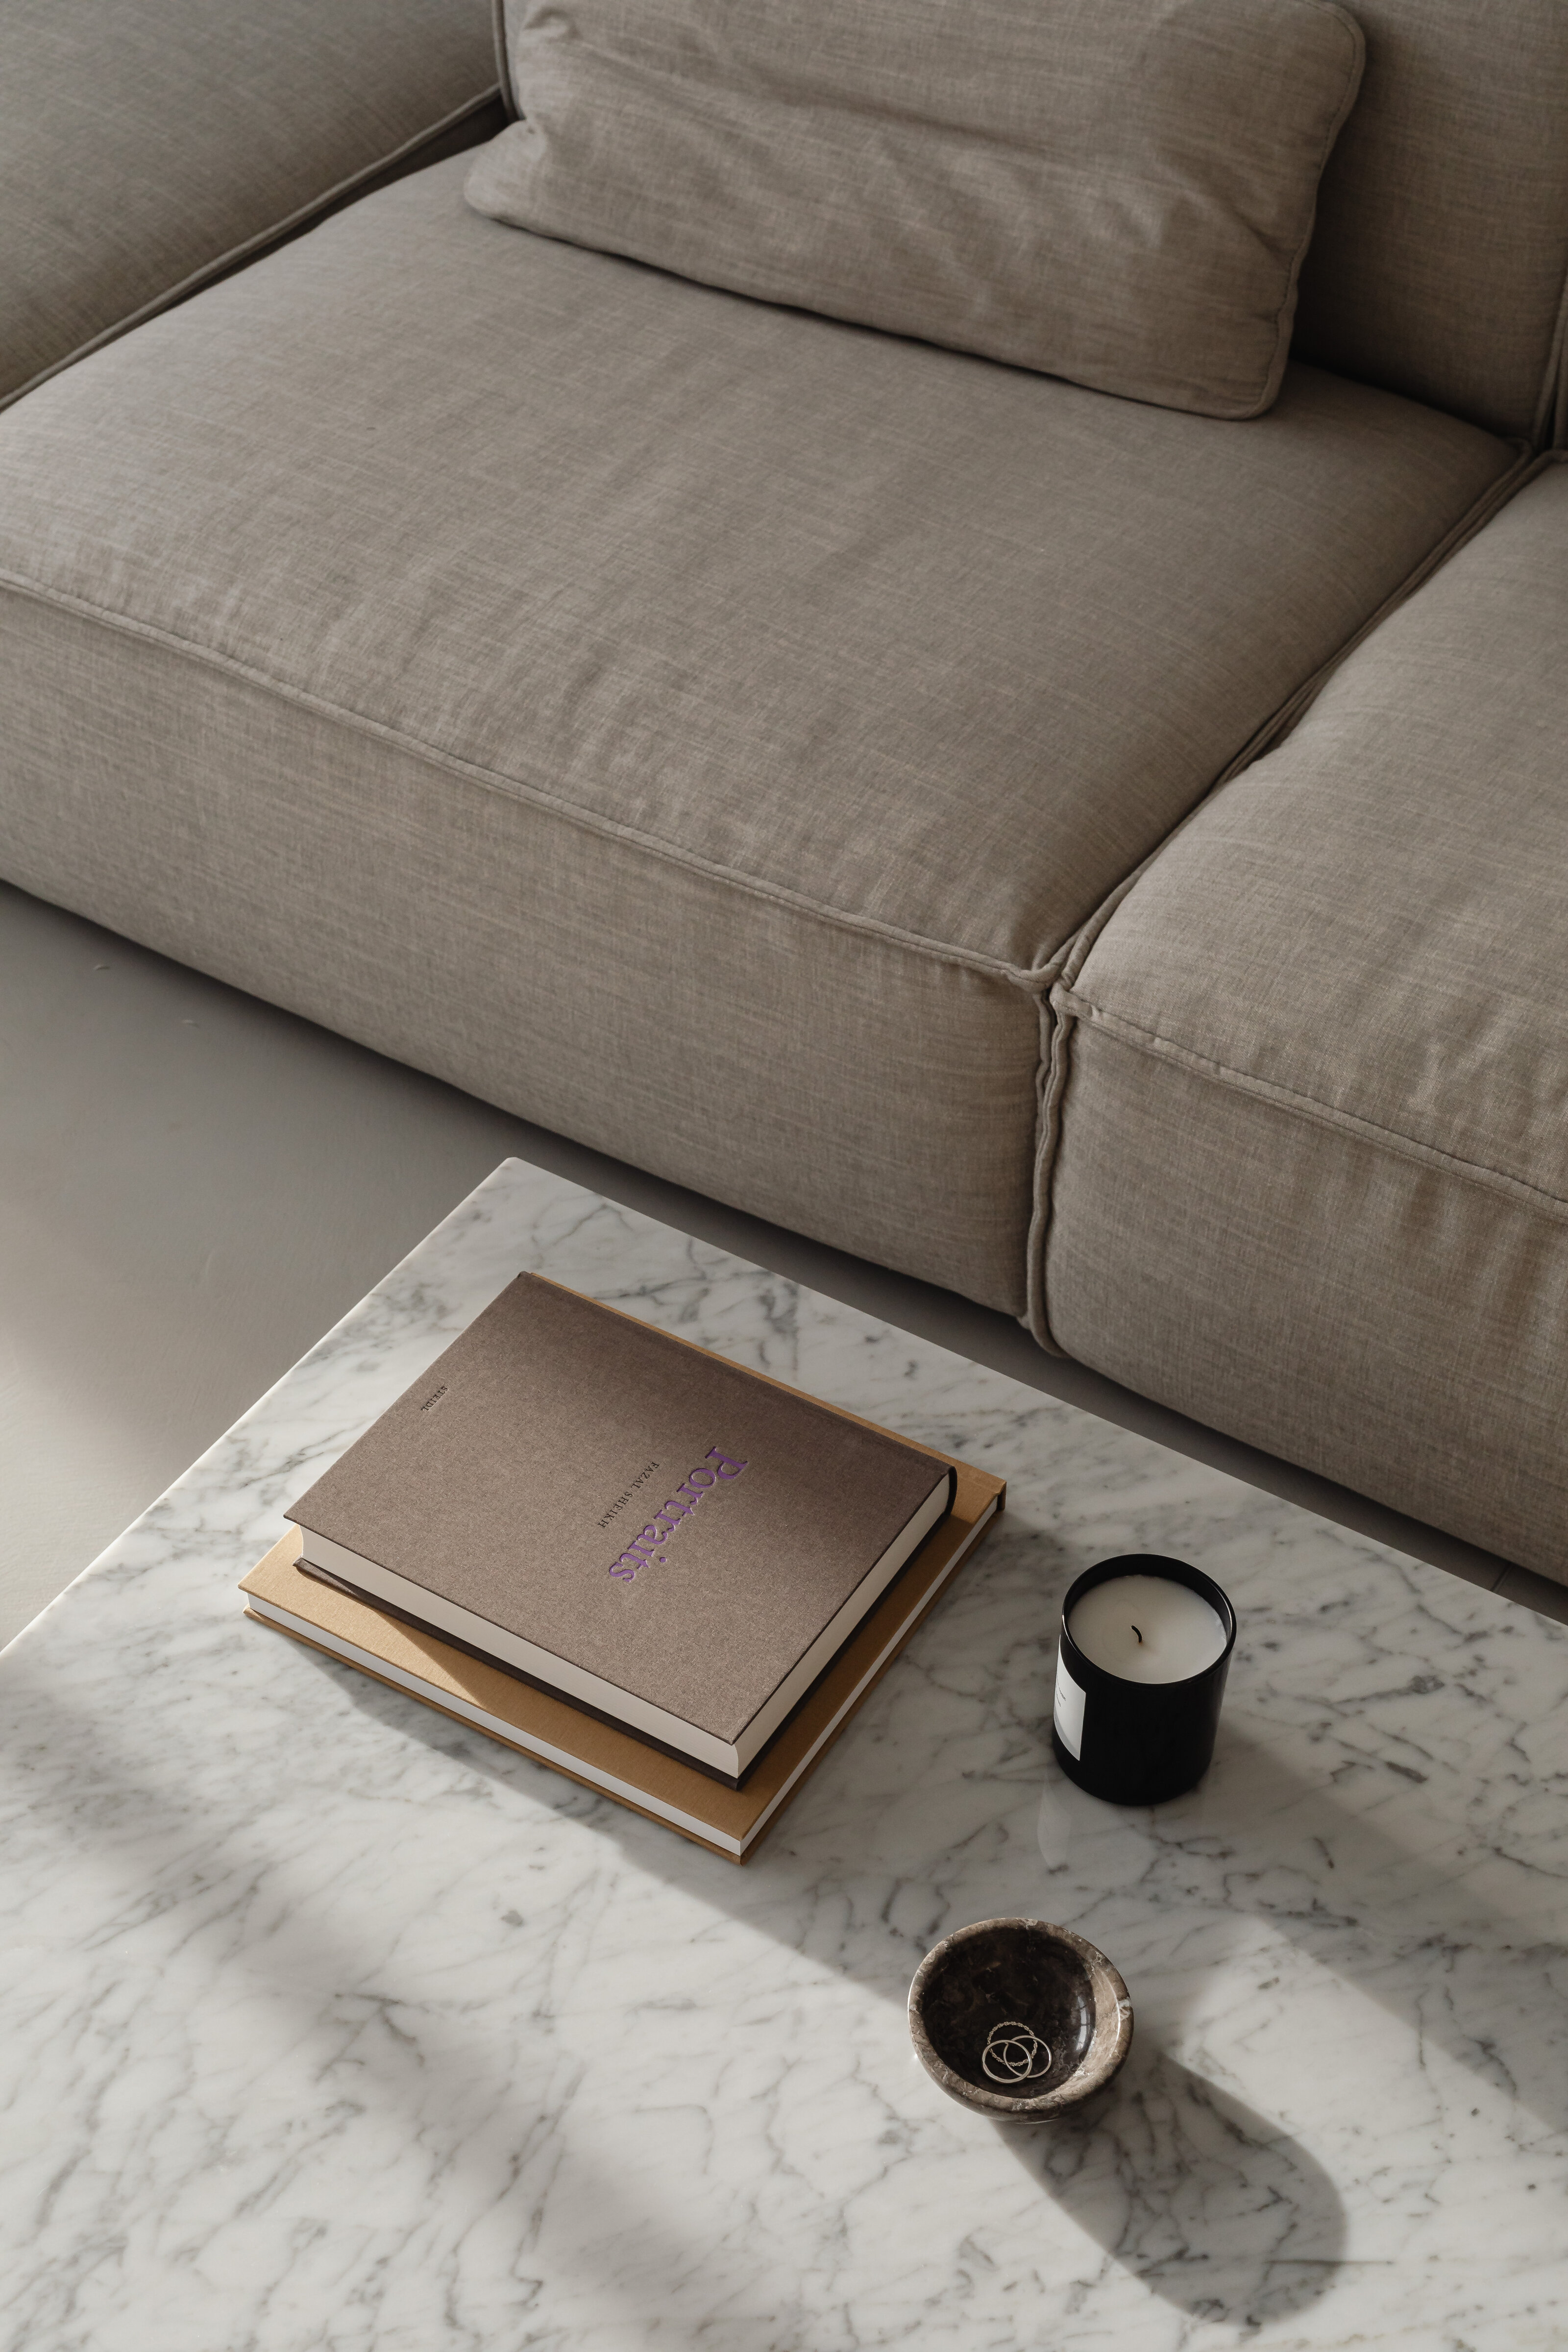 kaboompics_living-room-gray-beige-sofa-marble-coffee-table-coffee-table-books-candle-29384